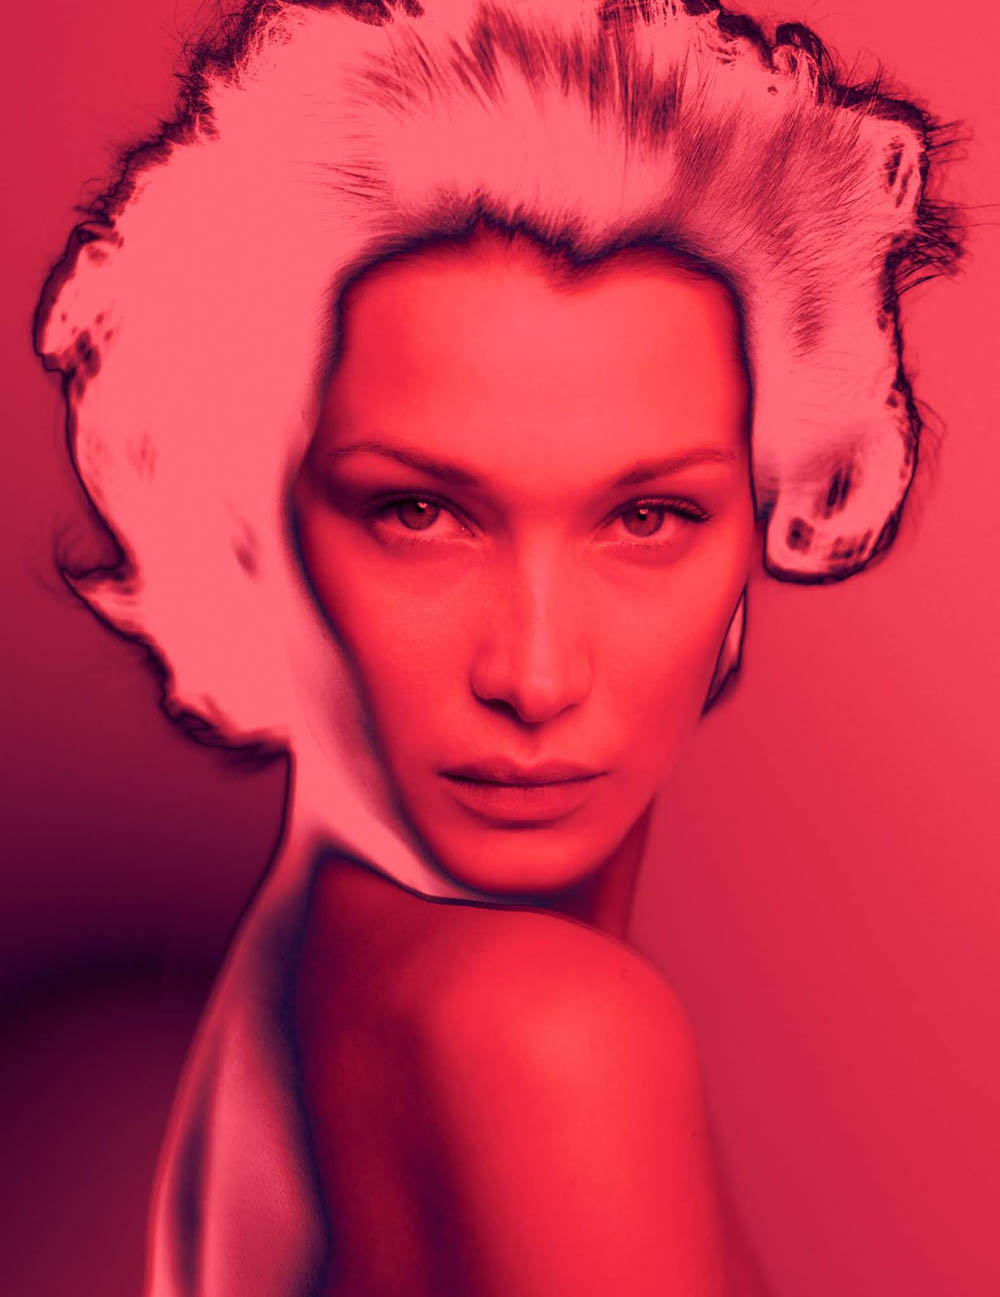 Bella Hadid covers Vogue Greece April 2020 by Chris Colls